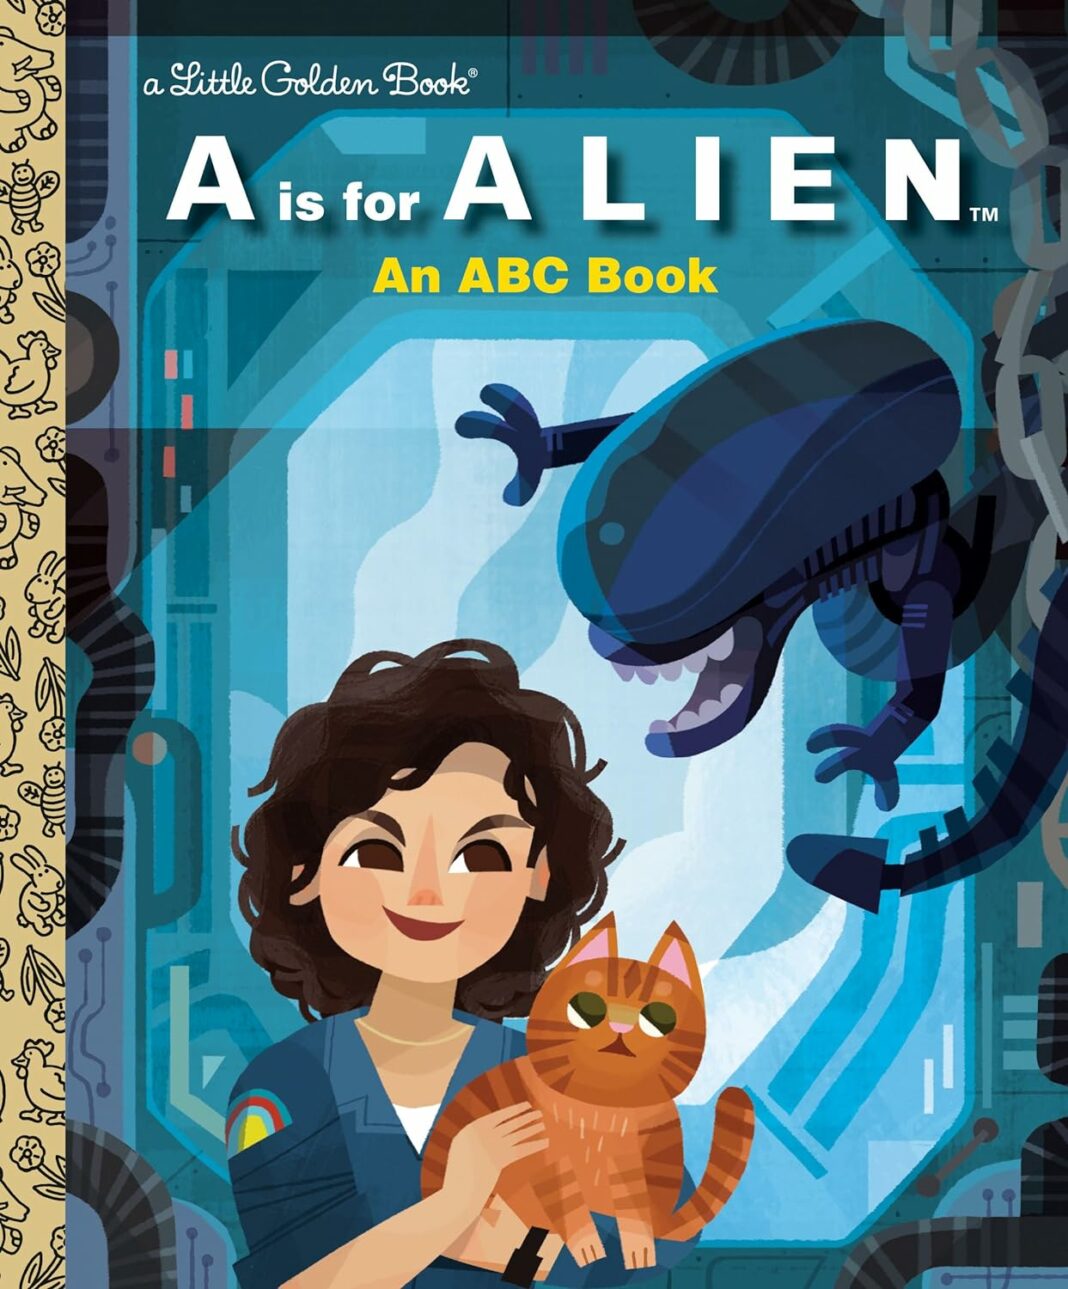 'A Is for Alien: An ABC Book' - Disney is releasing a Children's Book Based on the Iconic Horror Film